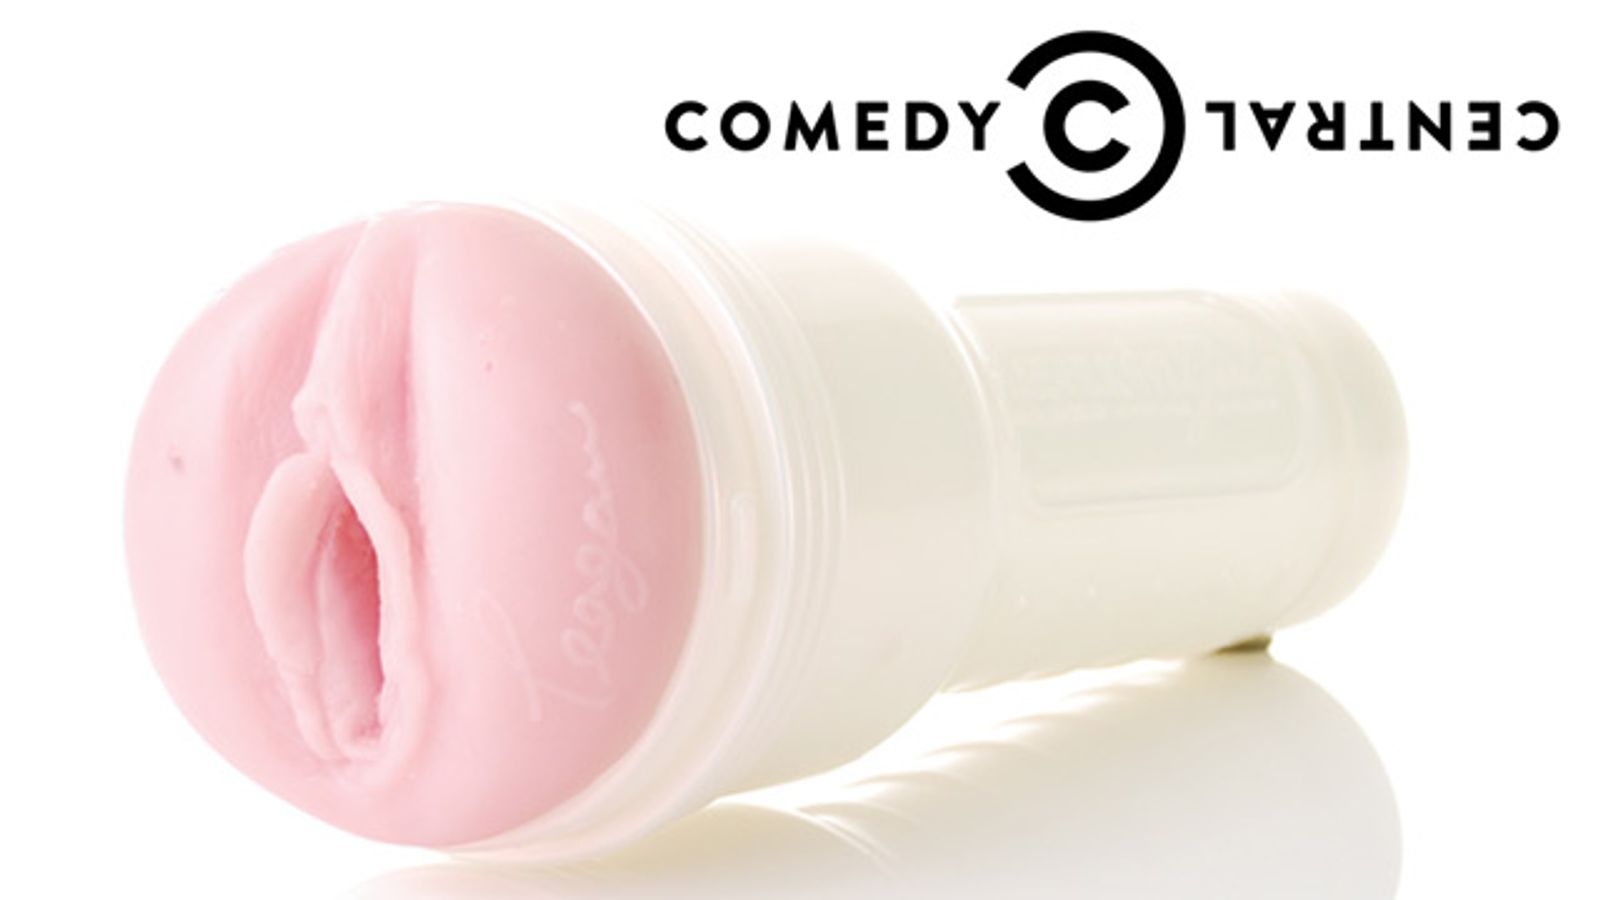 Fleshlight Appears on Comedy Central’s ‘Tosh.0’